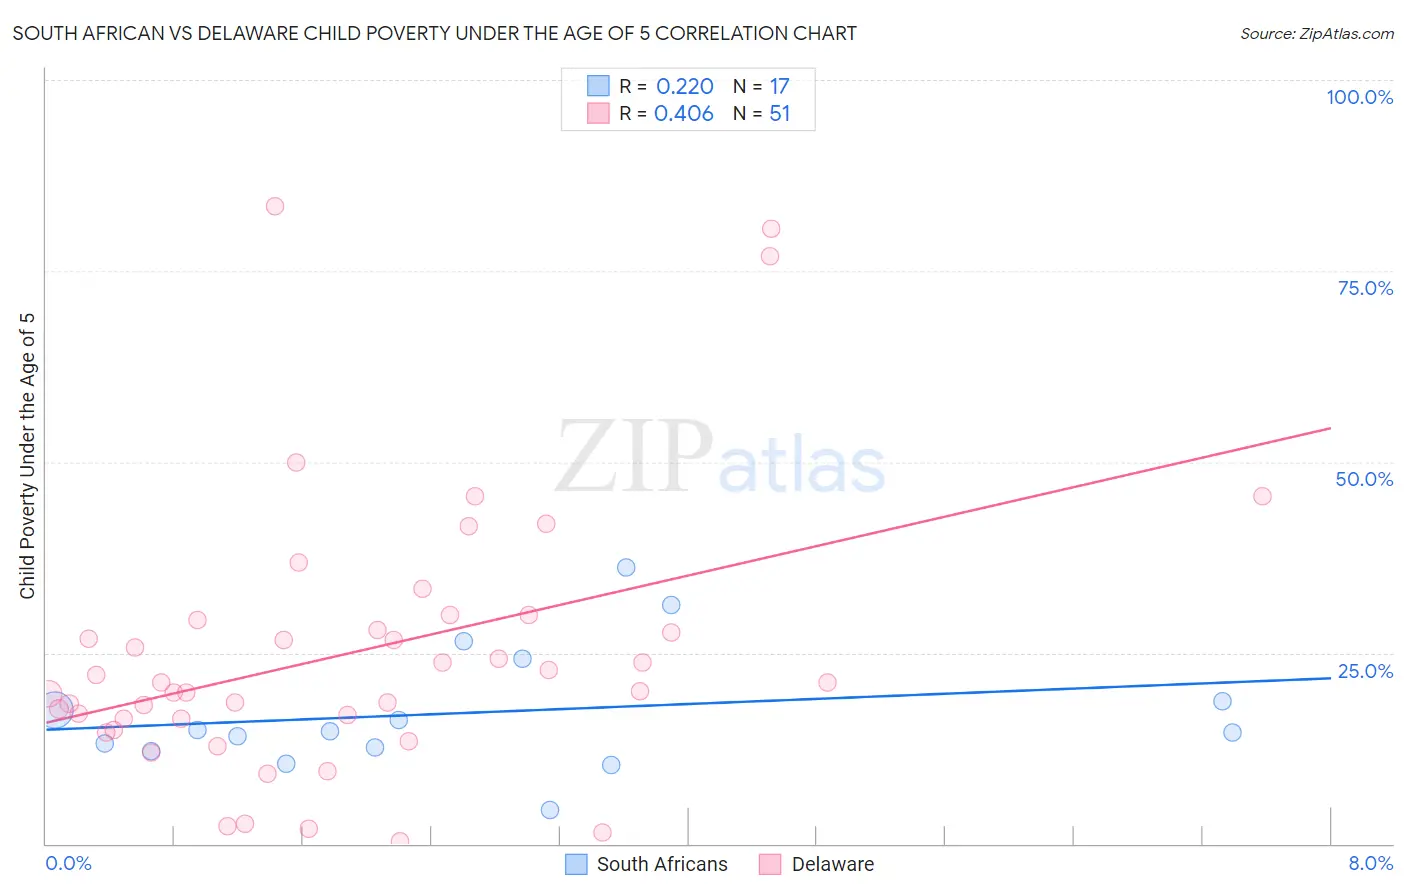 South African vs Delaware Child Poverty Under the Age of 5